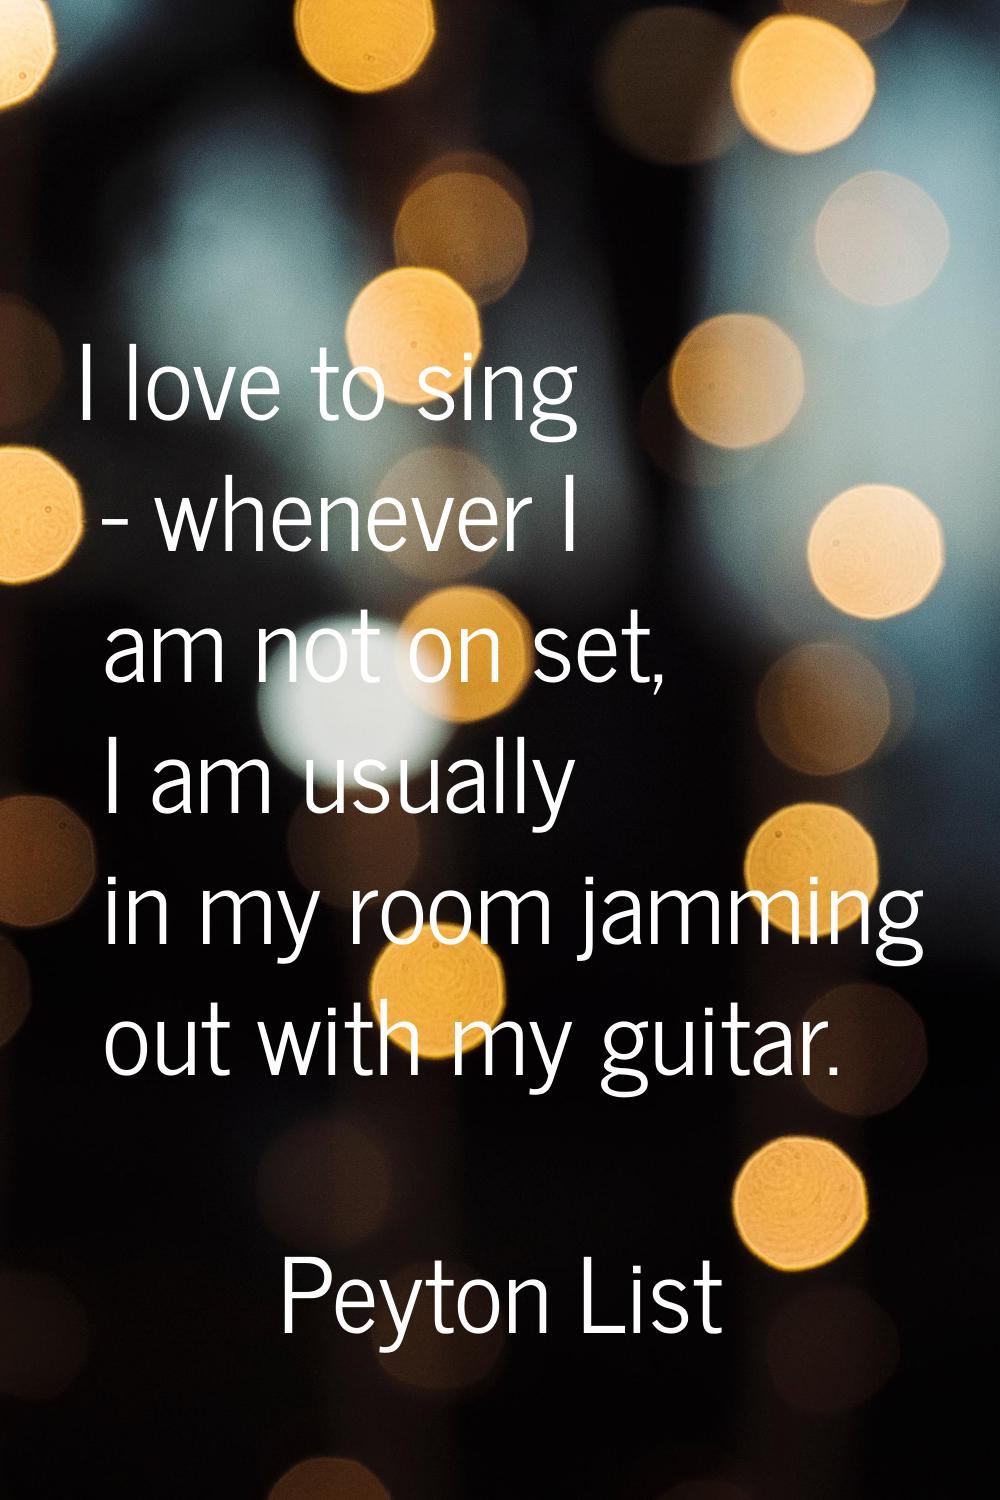 I love to sing - whenever I am not on set, I am usually in my room jamming out with my guitar.